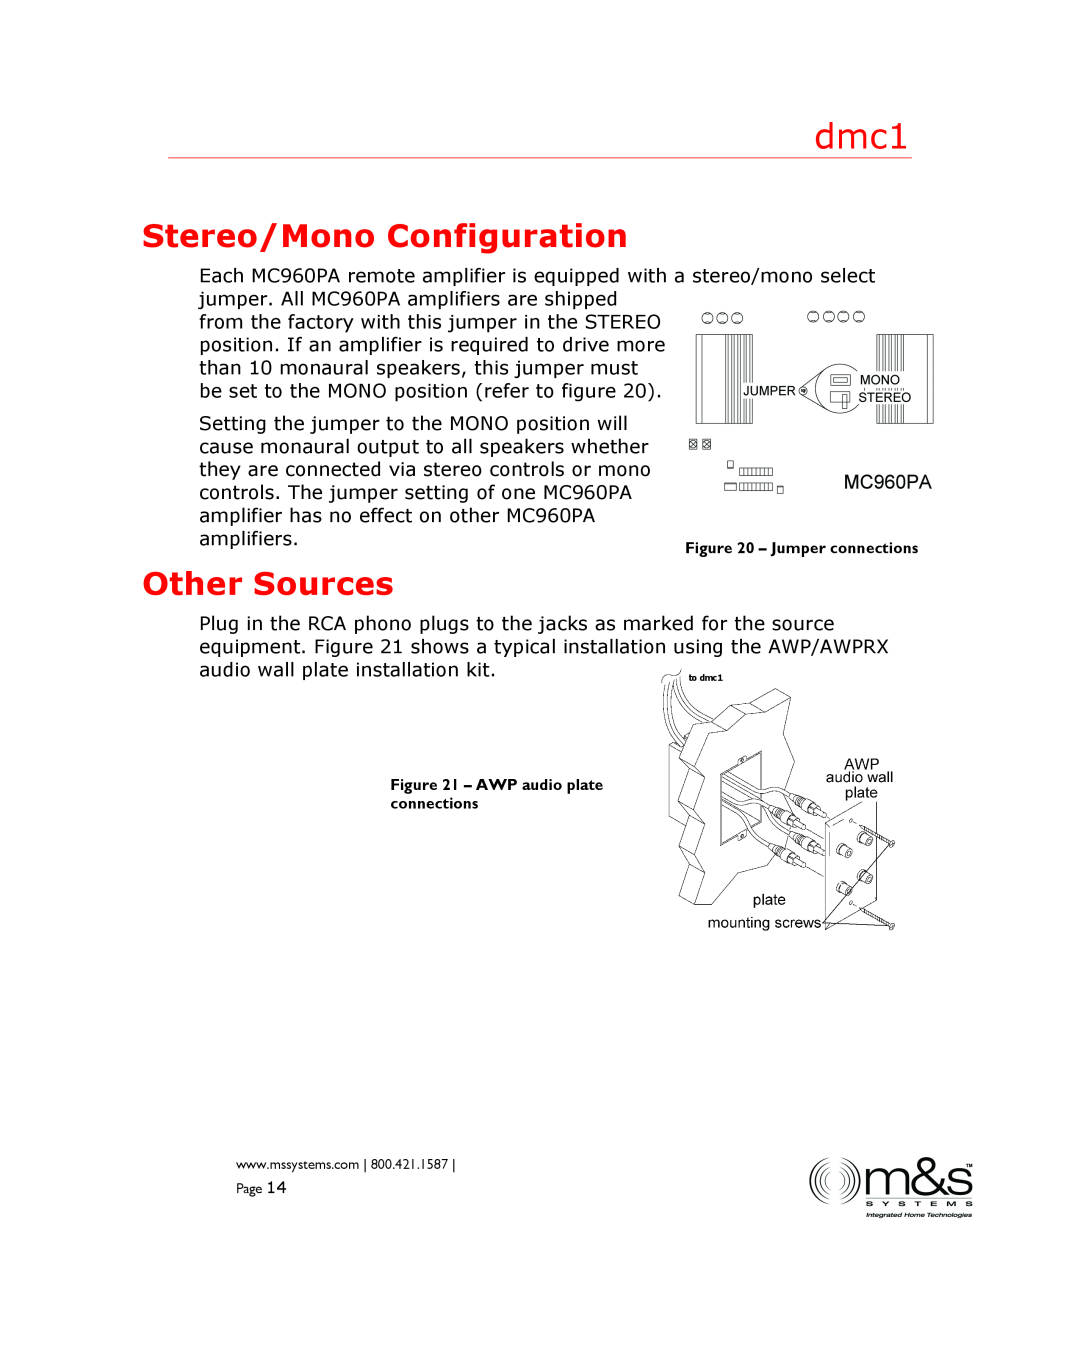 M&S Systems dmc1 manual Stereo/Mono Configuration, Other Sources 